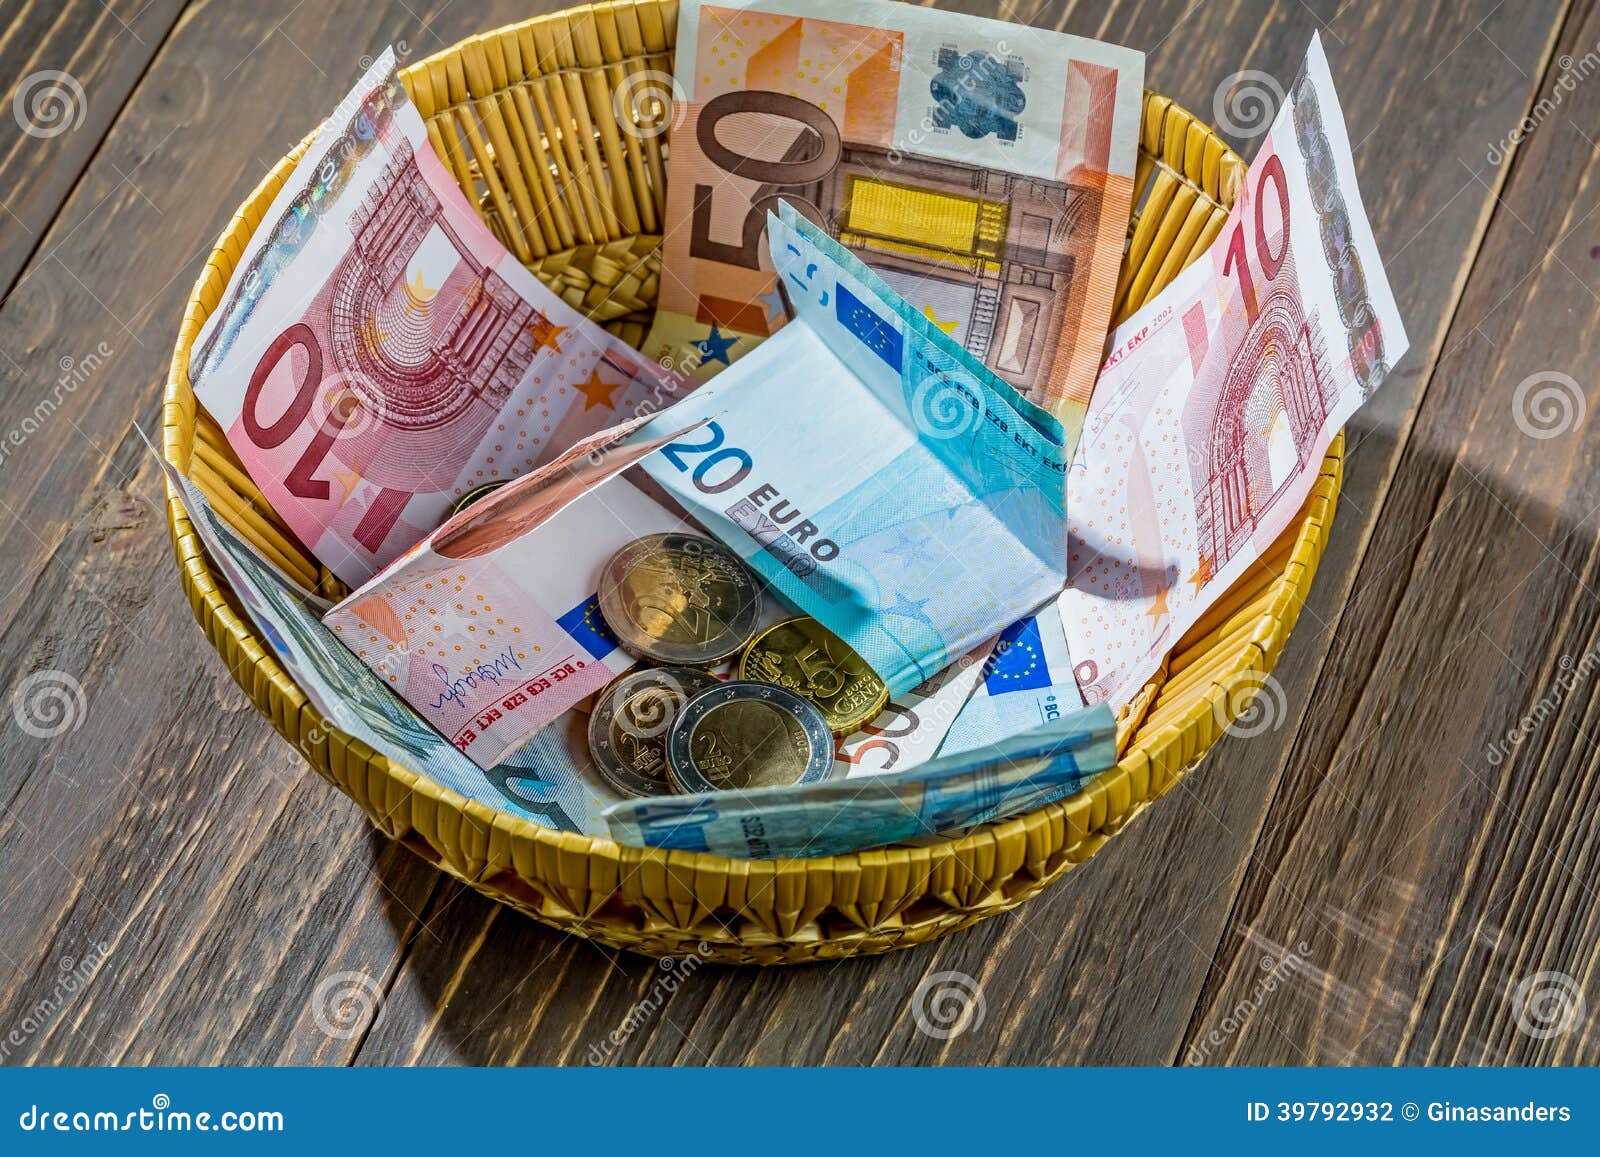 basket with money from donations